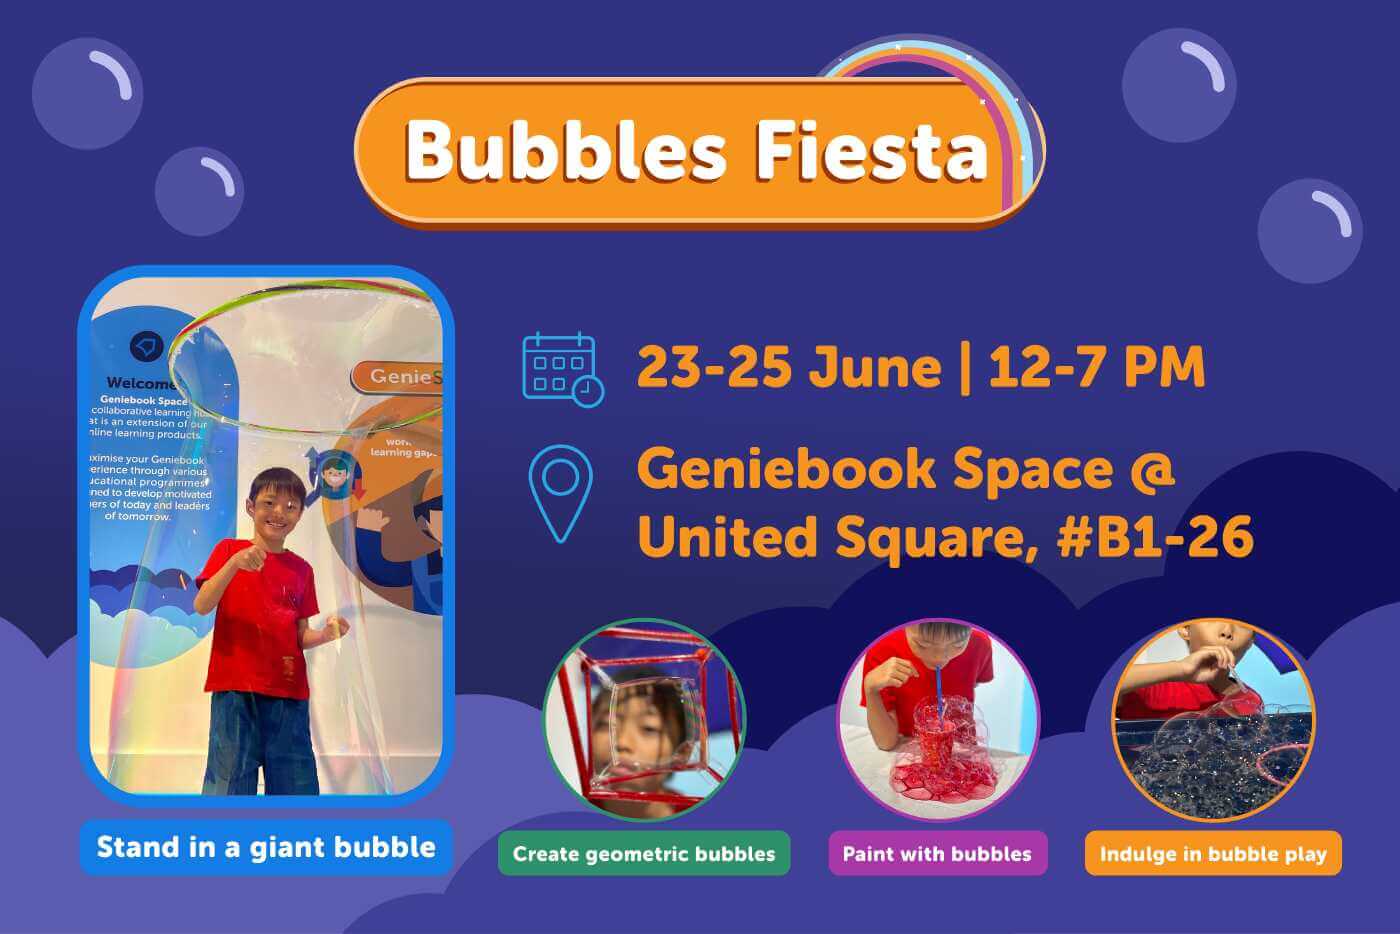 Bubbles Fiesta: A whimsical time of learning and poppin' good fun!